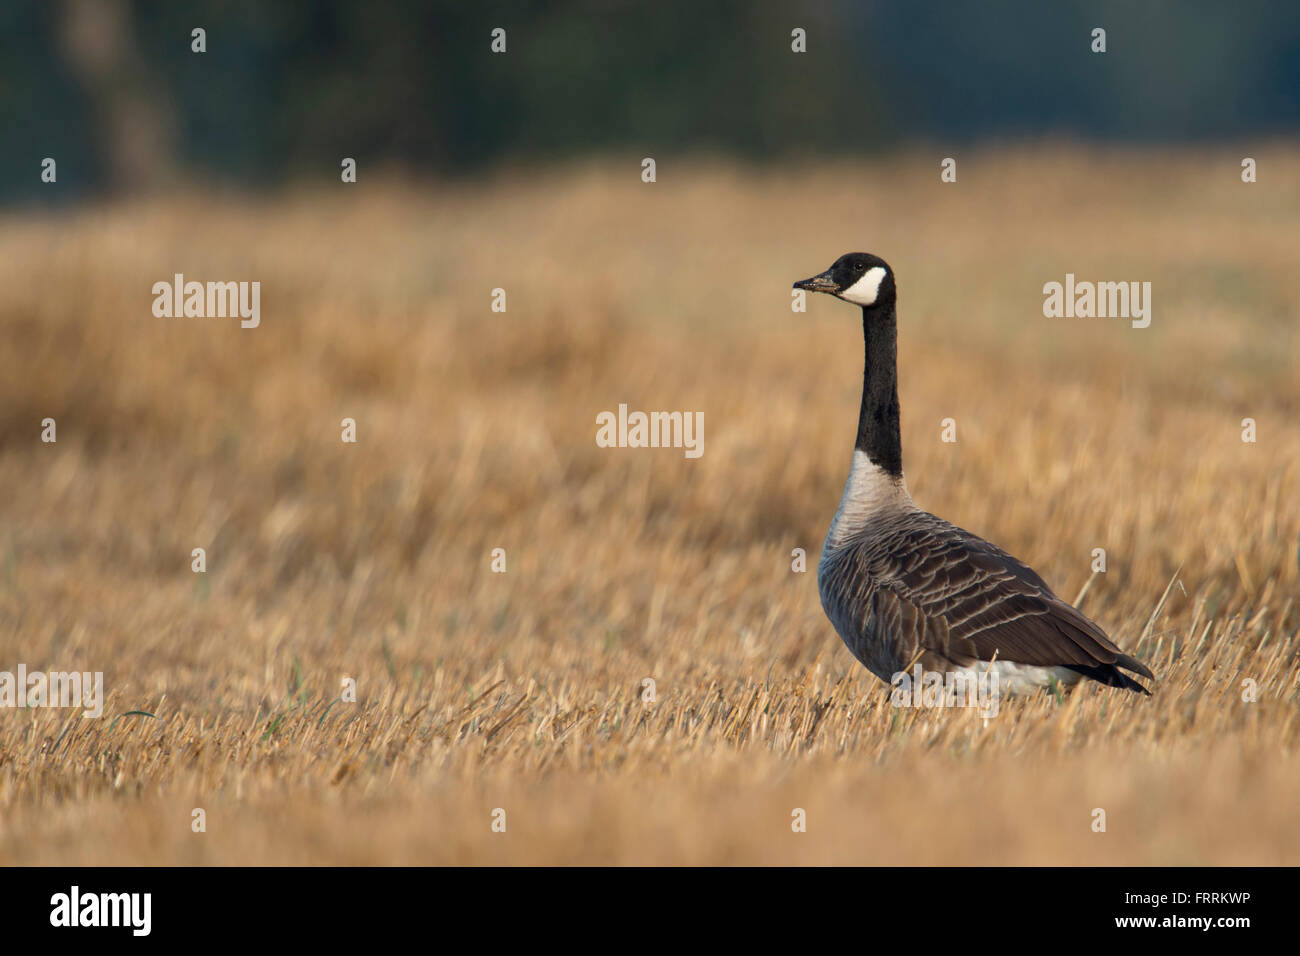 Canada Goose / Kandagans ( Branta canadensis ), adult bird, sitting on a golden stubble field, watching around attentively. Stock Photo